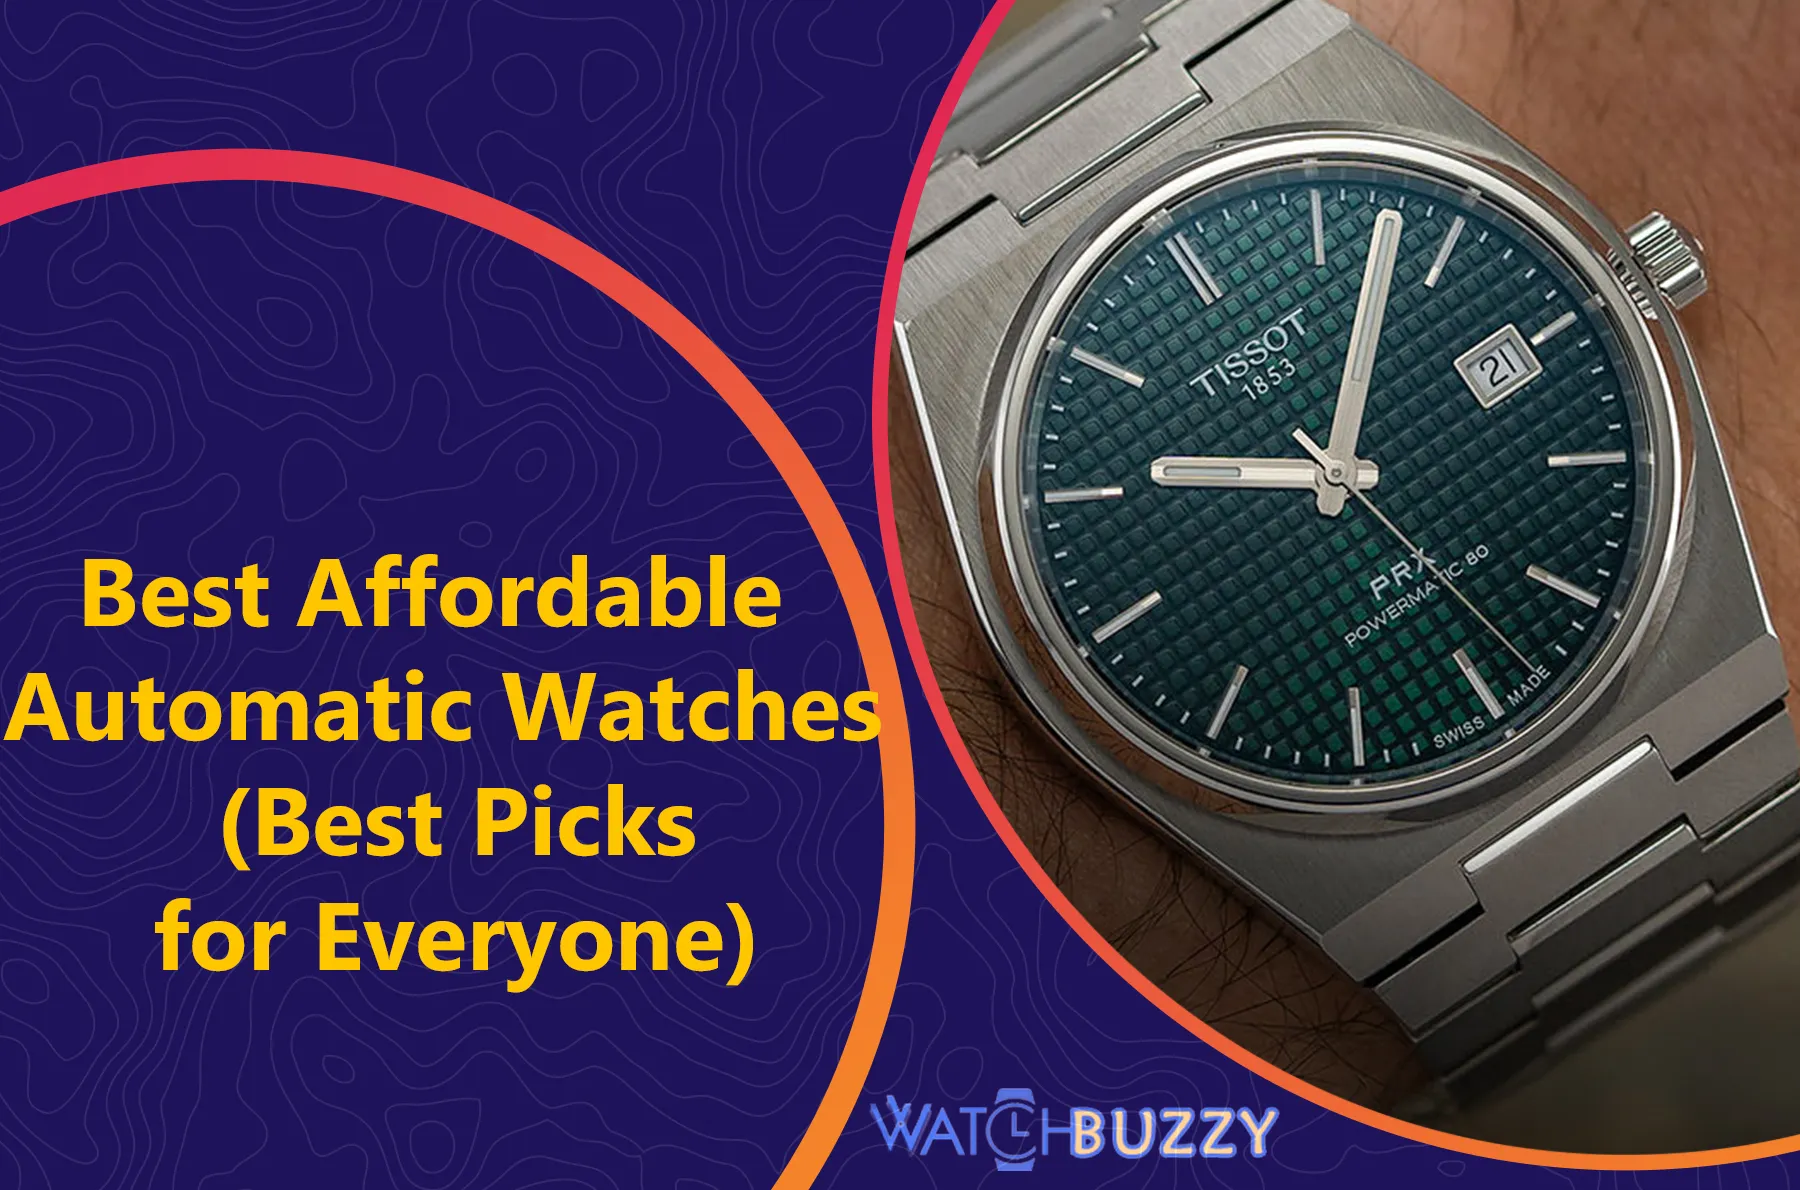 Best Affordable Automatic Watches (Best Picks for Everyone)